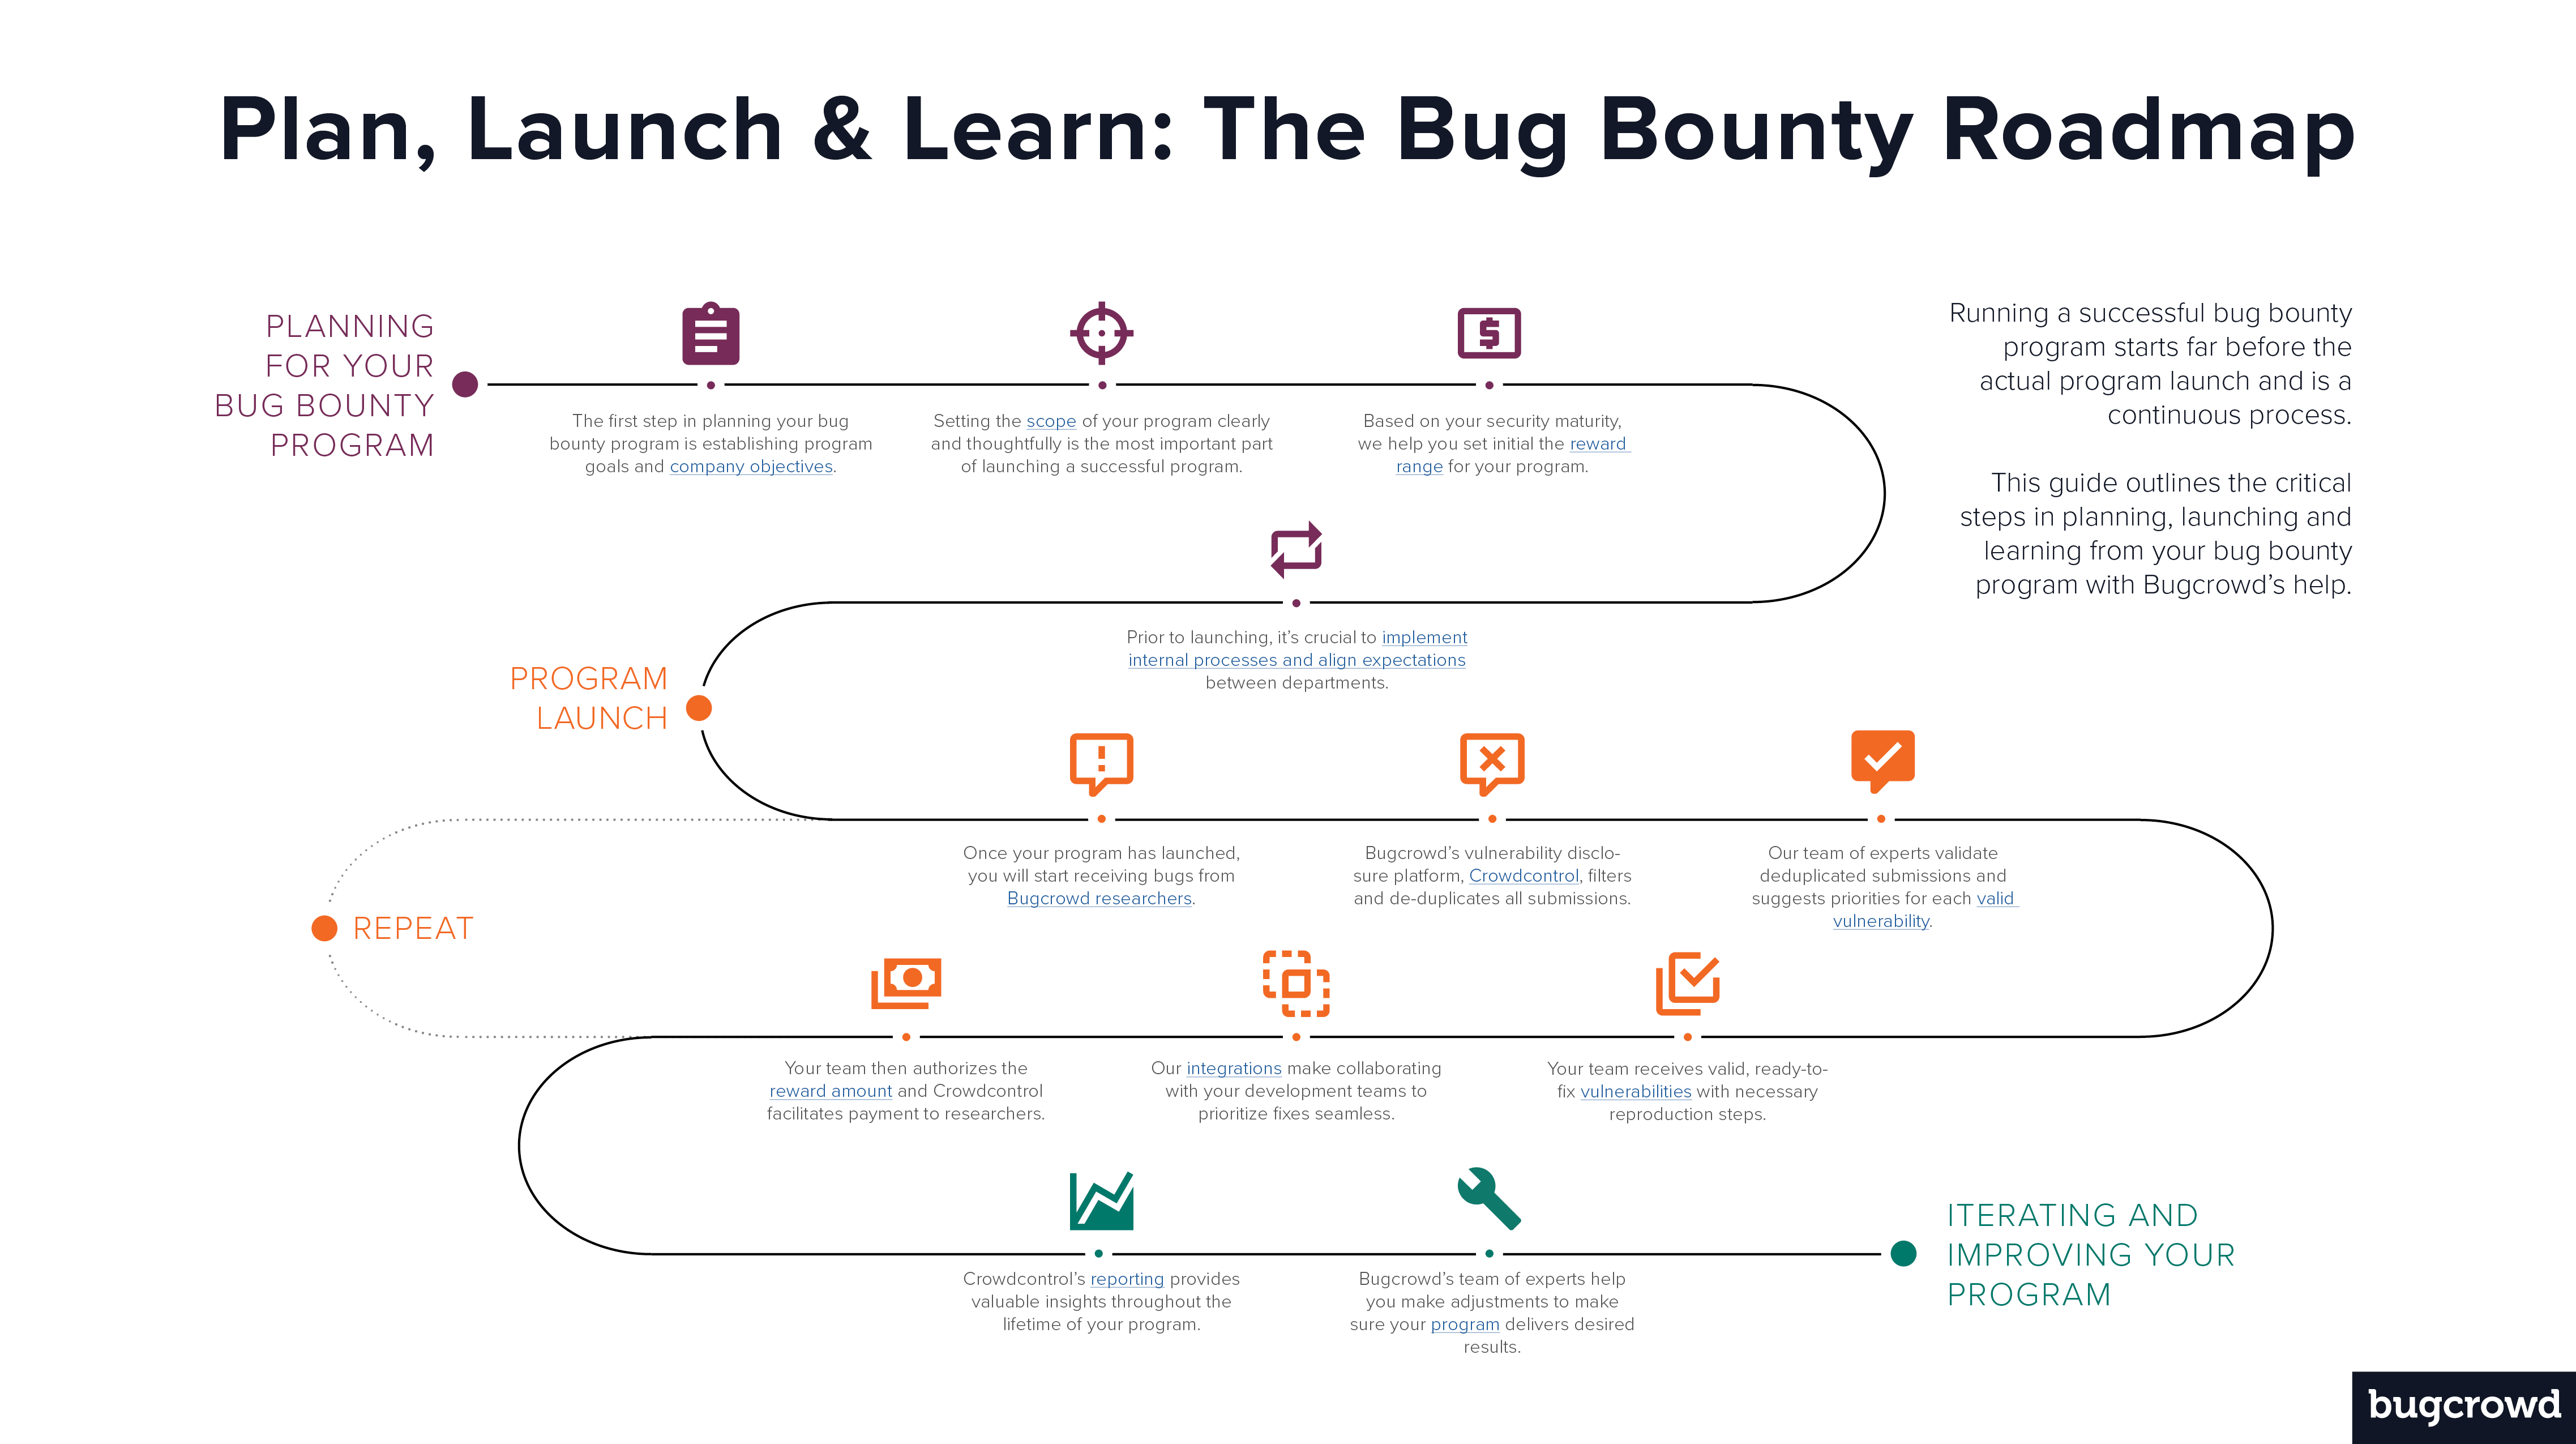 The Illustrated Guide to Planning, Launching and Iterating Your Bug Bounty Program